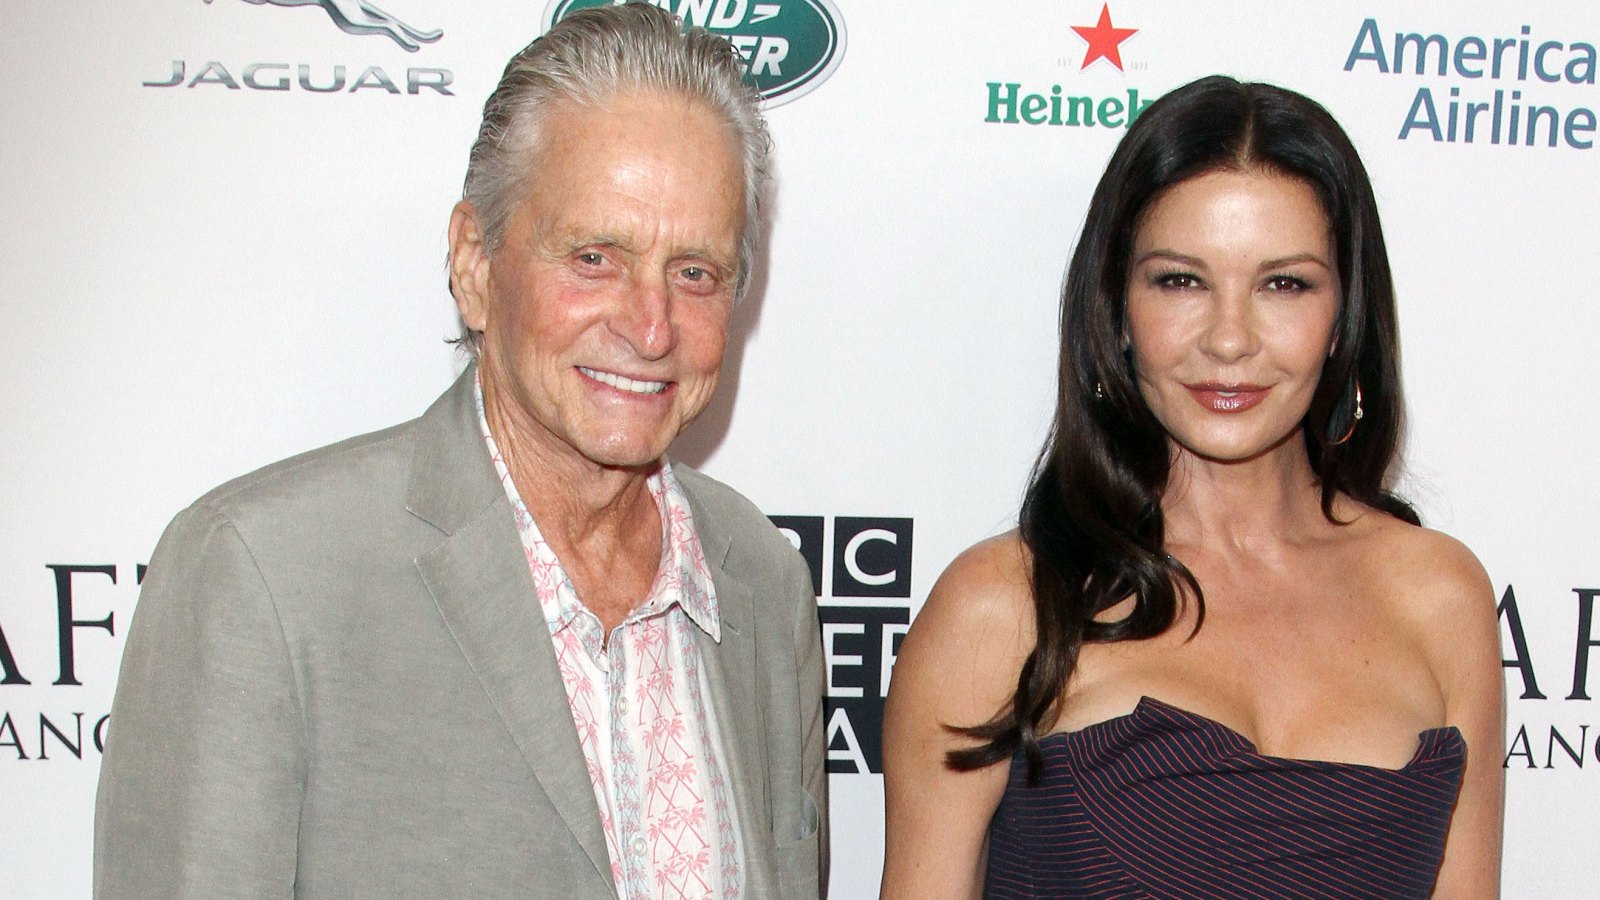 Michael Douglas Says Wife Catherine Zeta-Jones Still Gives Him Butterflies After More Than a Decade of Marriage